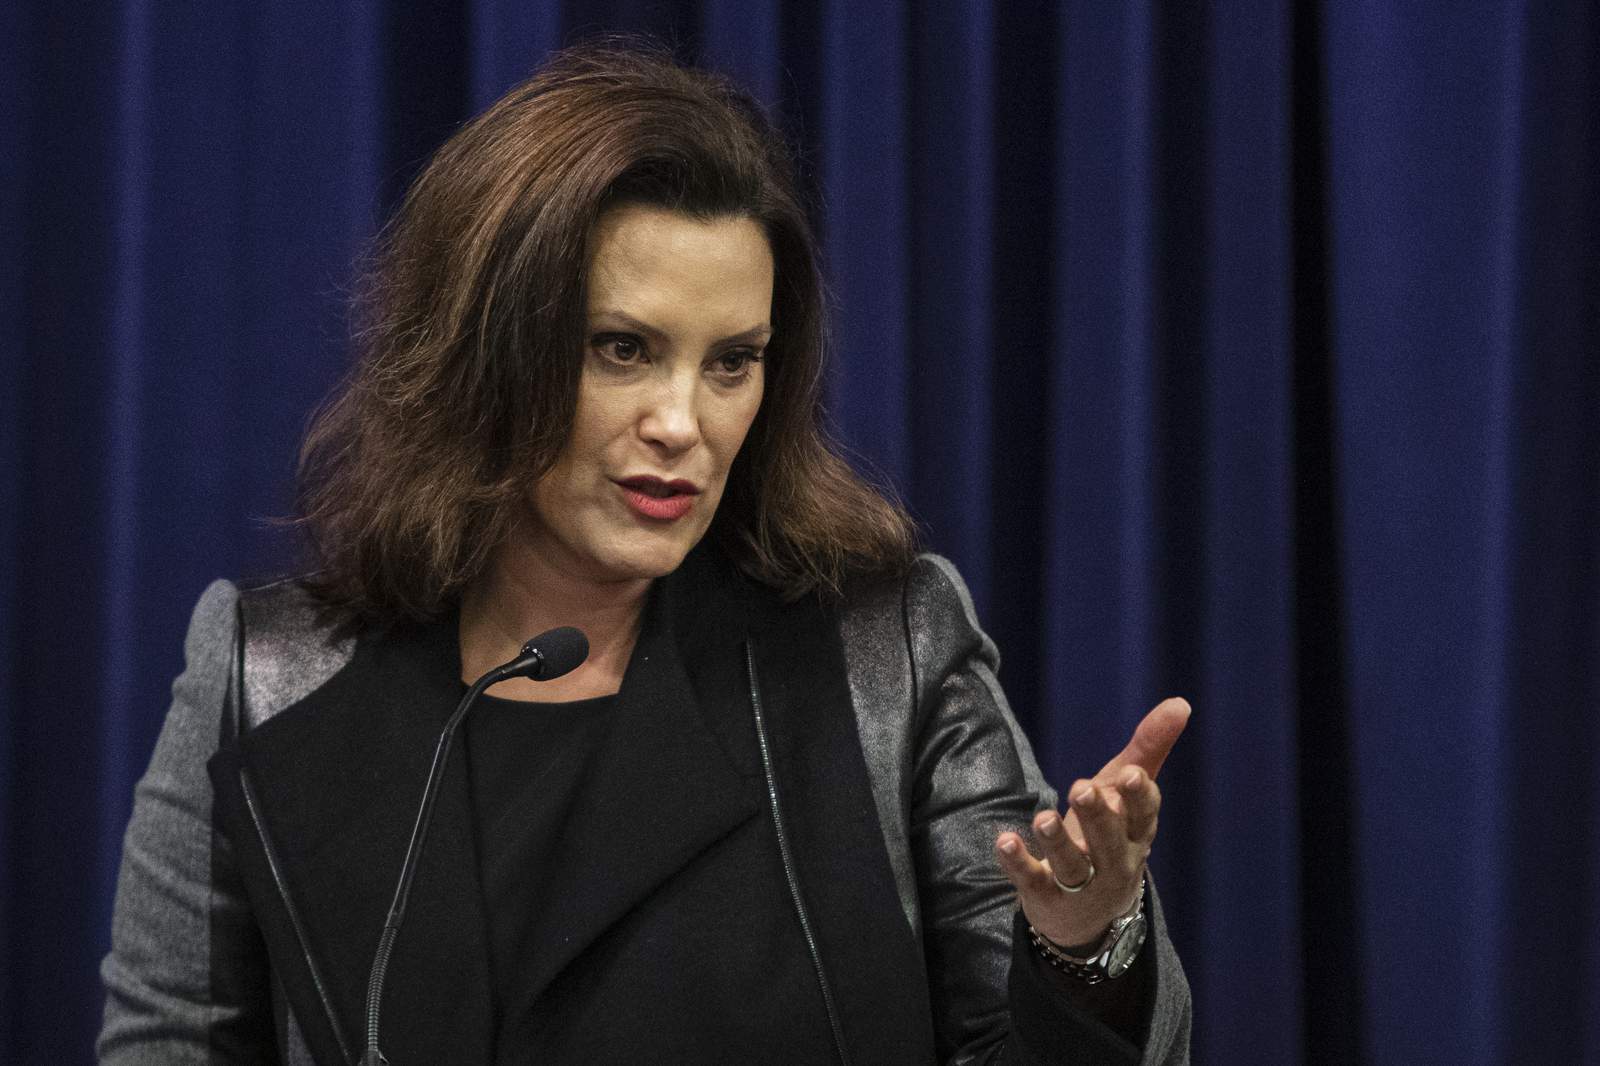 Dems pick Whitmer, Escobar for Trump State of Union response